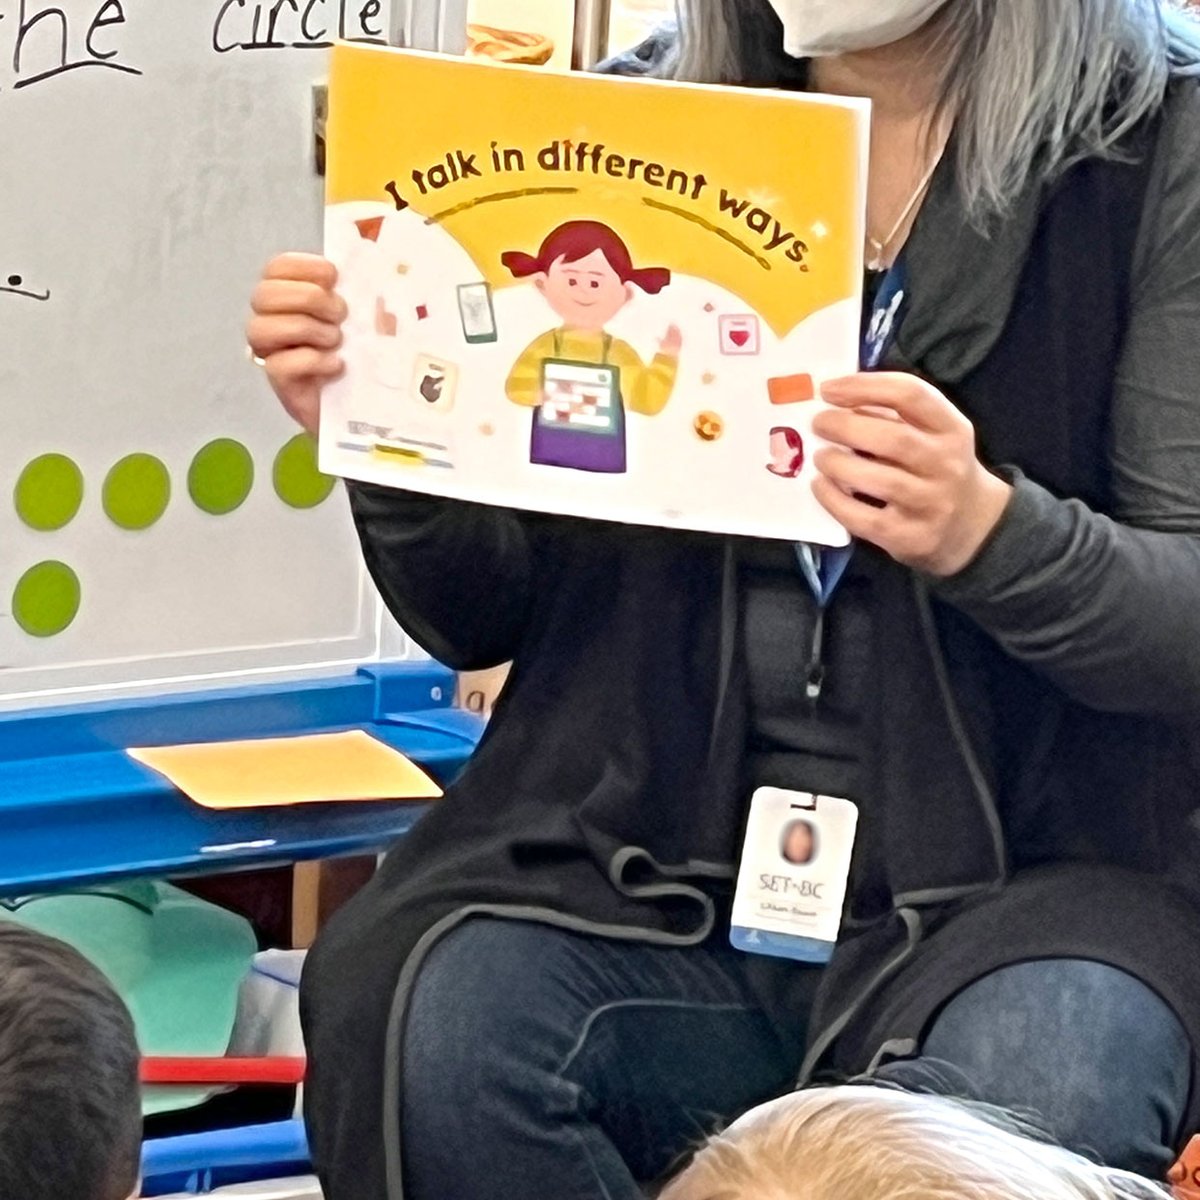 This week, a SET-BC team has been visiting Sk'aadgaa Naay Elementary in beautiful #HaidaGwaii. One of our educators read a story about alternative modes of communication to a K/1 class. The goal being to help those using #AAC feel more included. #SD50 #BCed #InclusiveClassroom